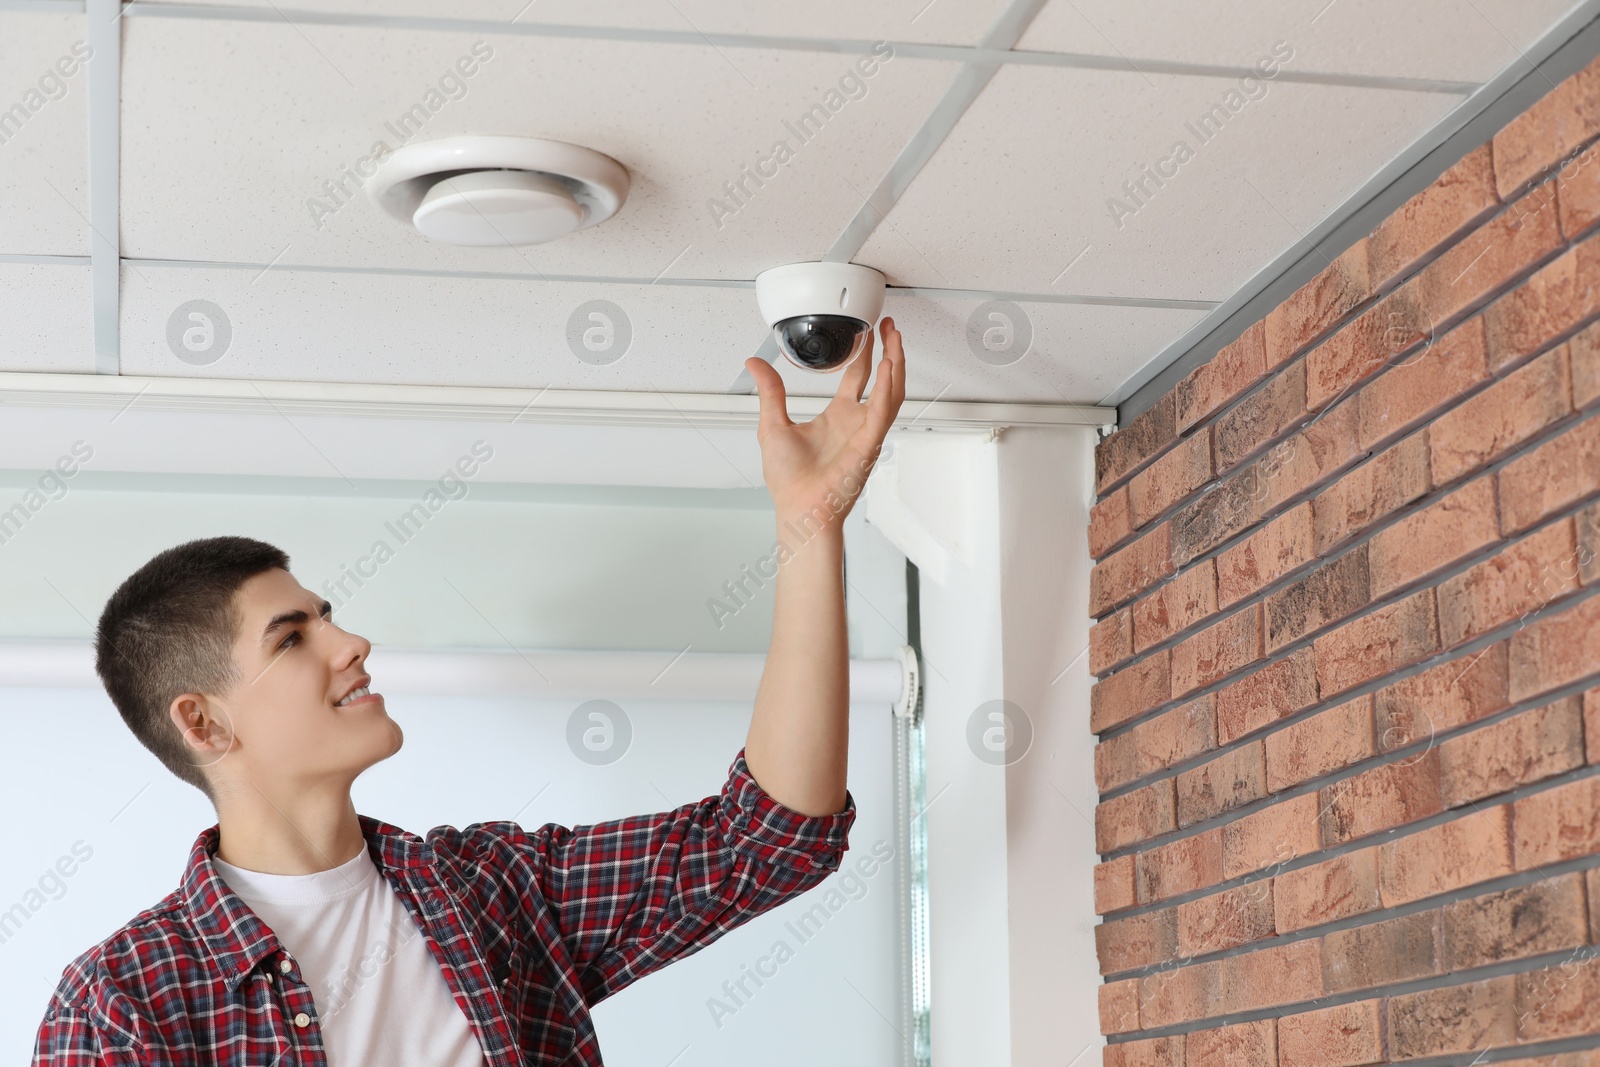 Photo of Technician installing CCTV camera on ceiling indoors